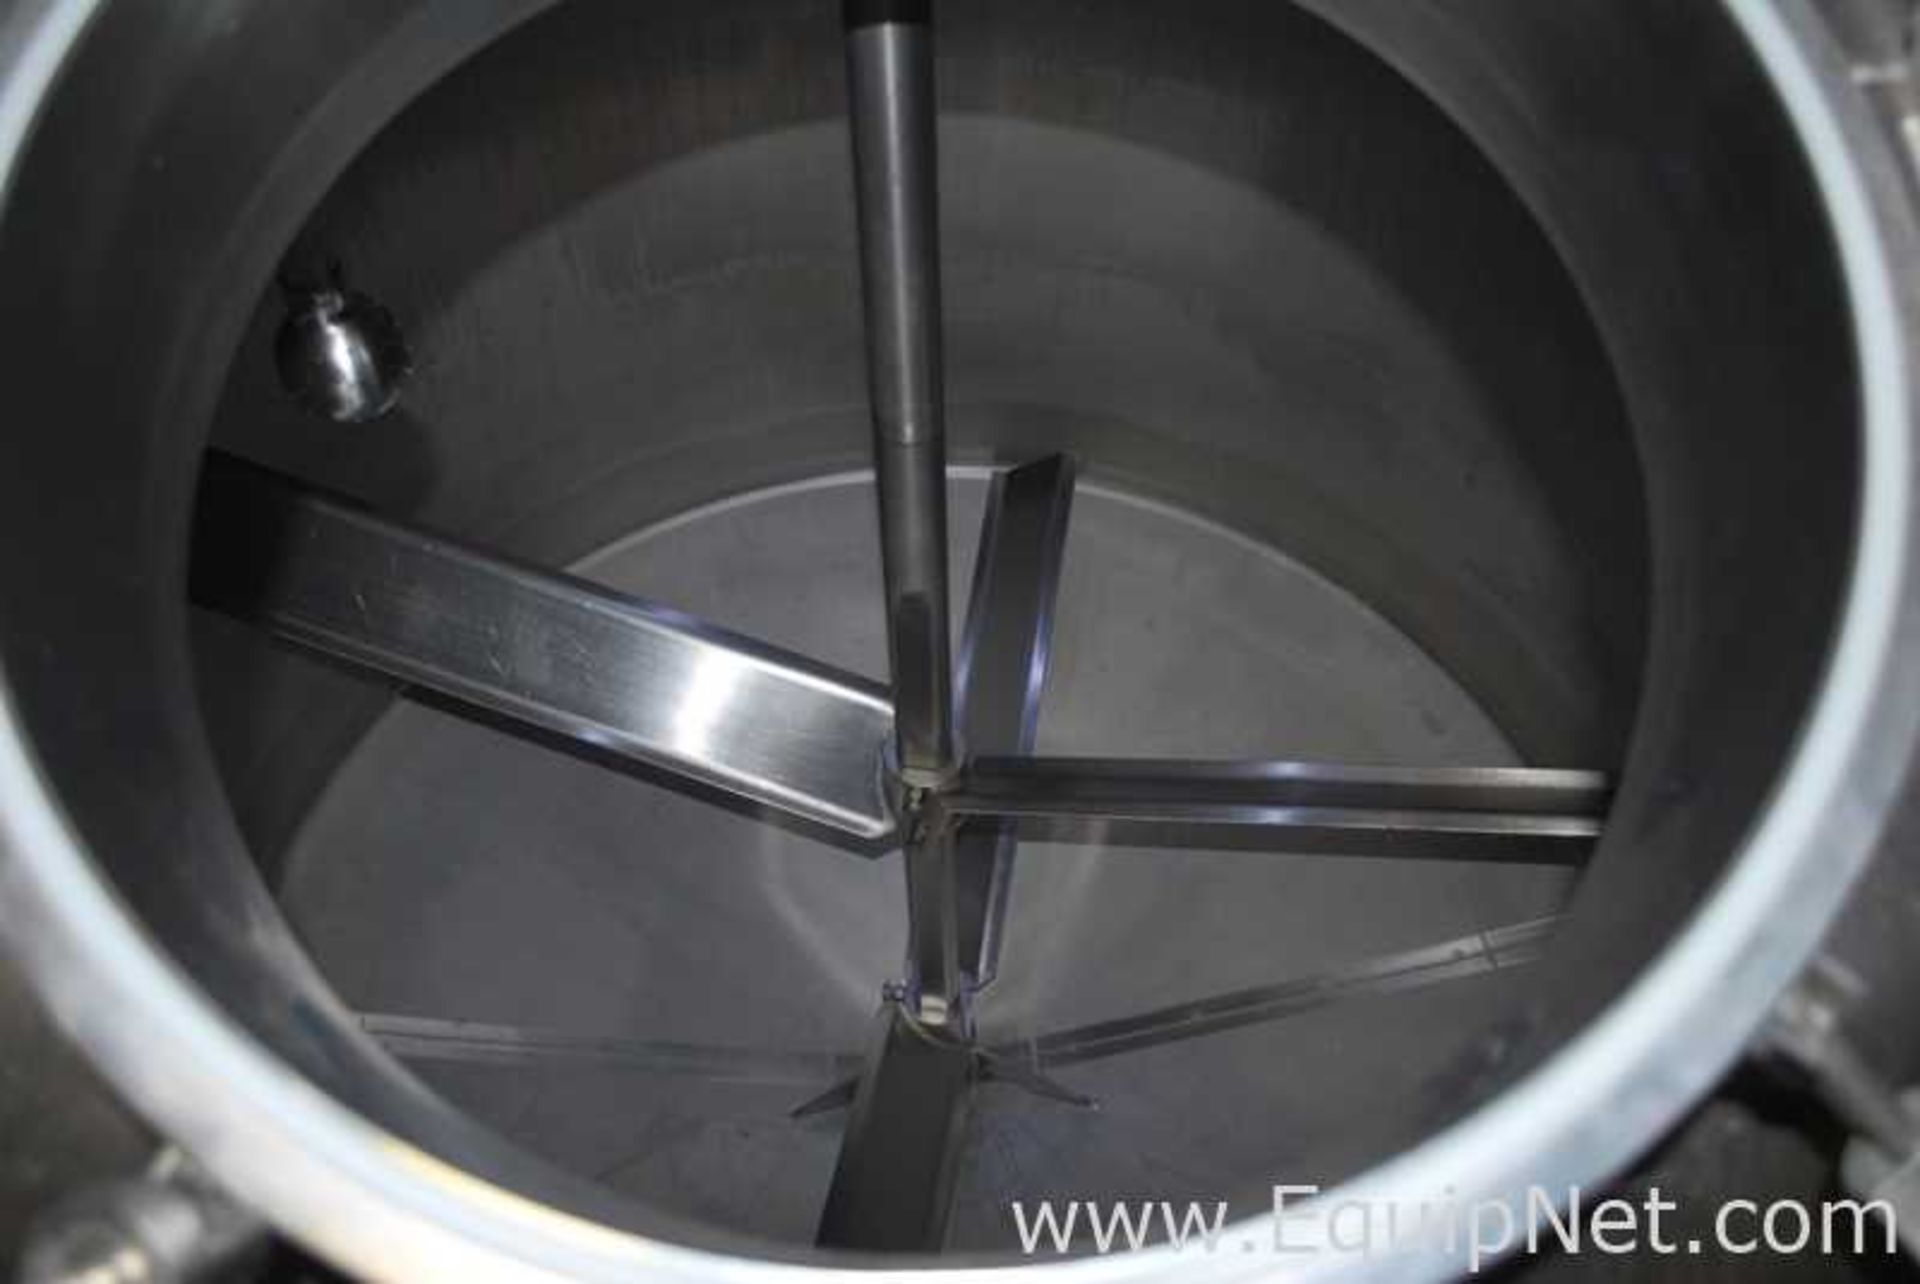 Brew House Sytem with Three- 20 BBL Vessels Mash Tun|Lauter Tun|Whirlpool-Boil Kettle - Image 3 of 10